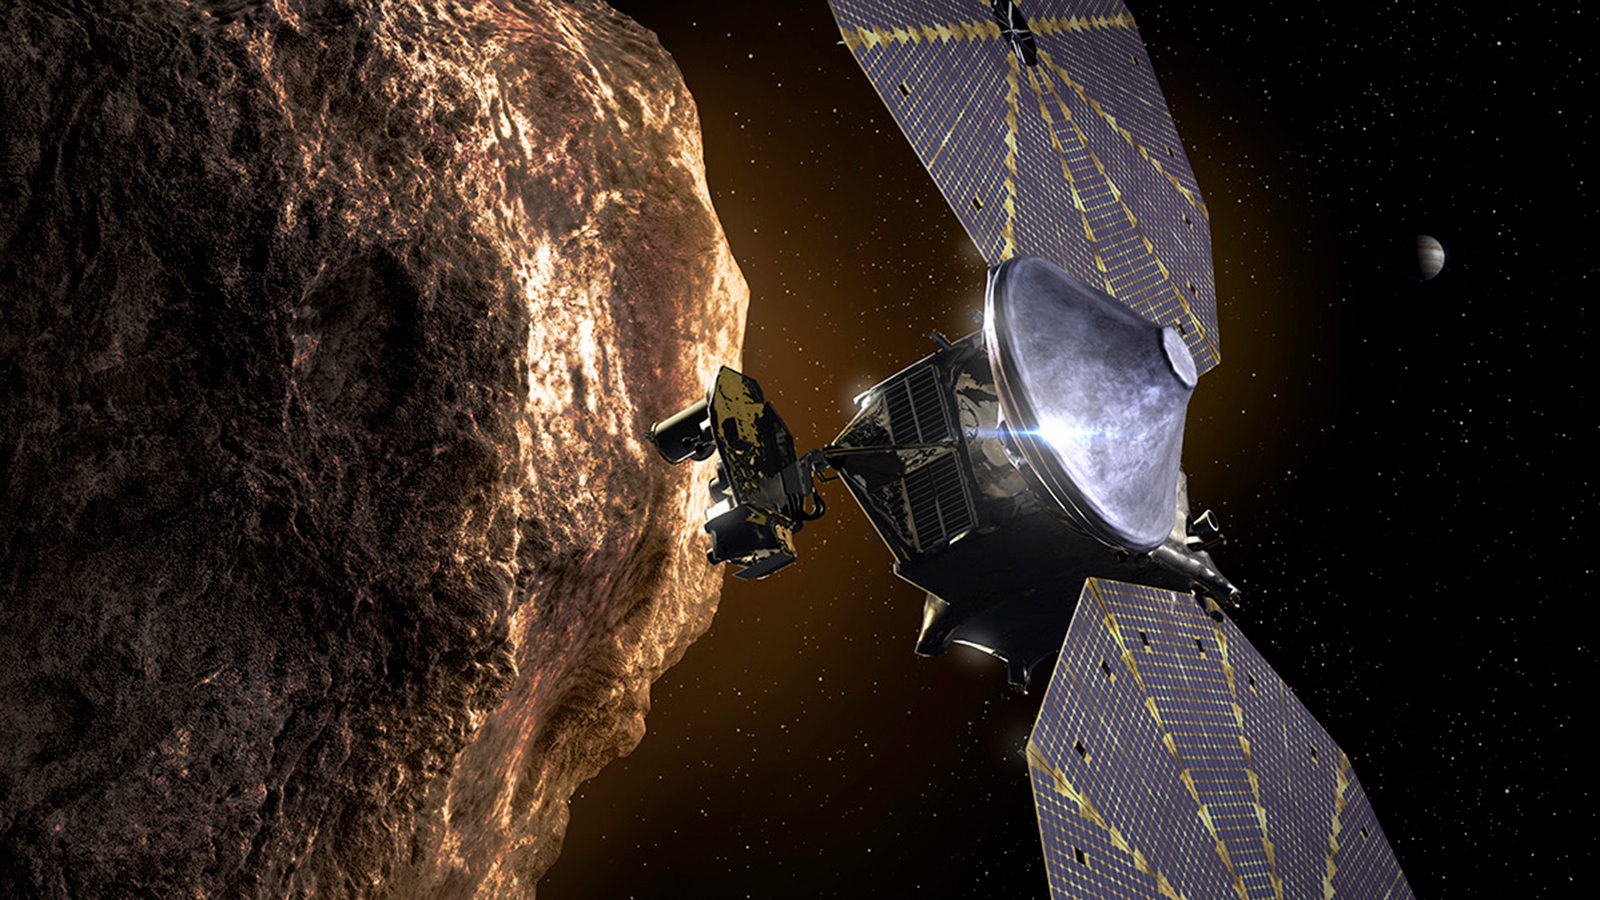 Artist's concept of the Lucy orbiter with its distinctive round solar panels as it flies past a Trojan asteroid near Jupiter.